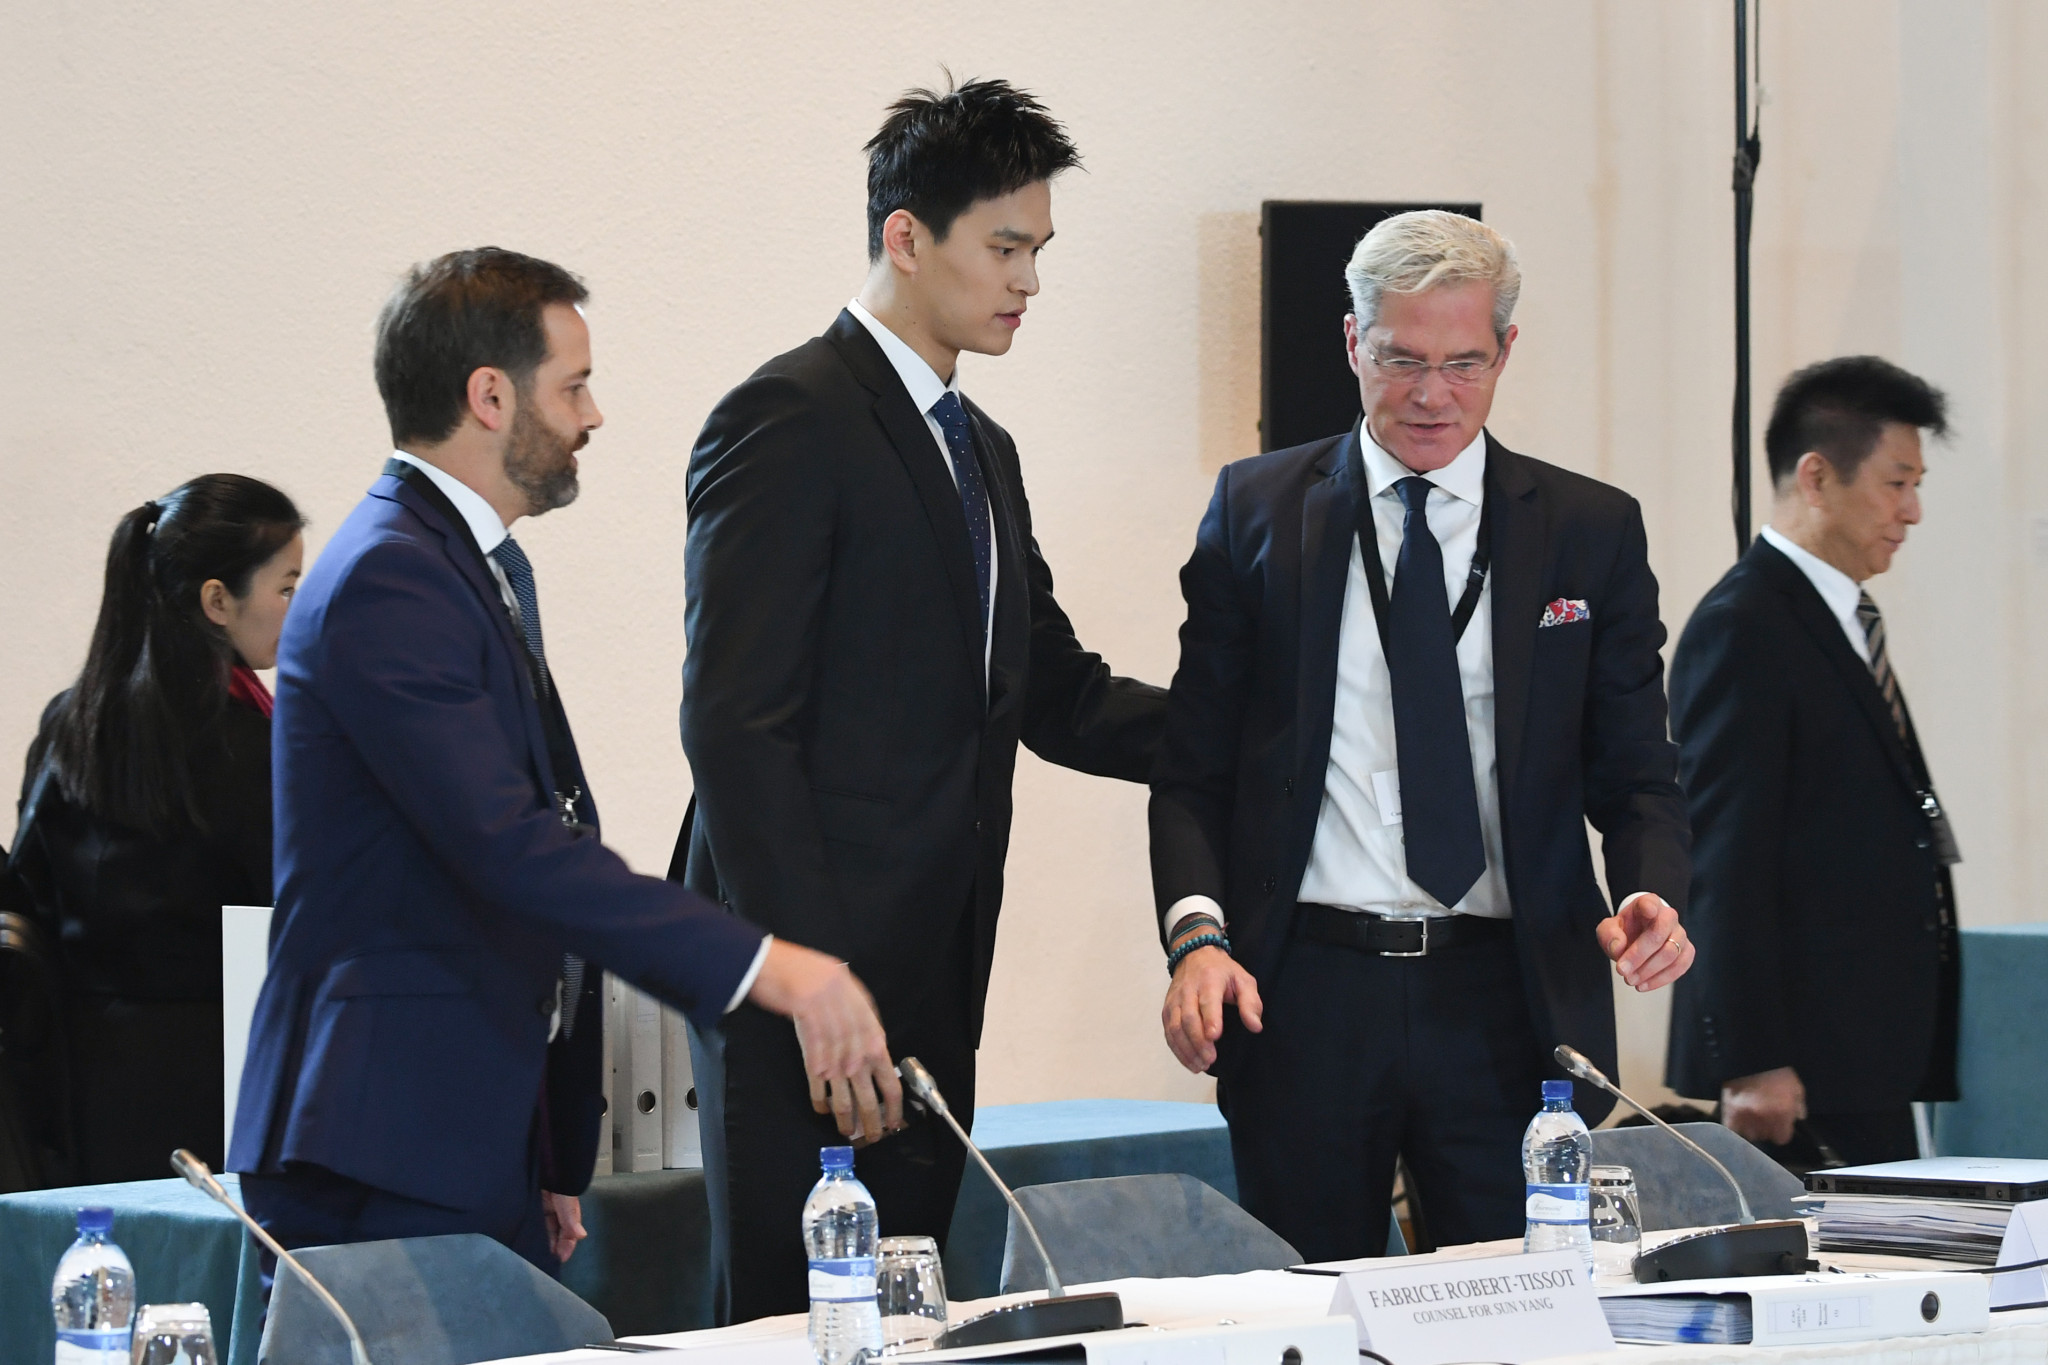 Fabrice Robert-Tissot, left, who heads Bonnard Lawson's sports division, helped China's three-time Olympic swimming gold medallist Sun Yang at his CAS hearing last month ©Getty Images